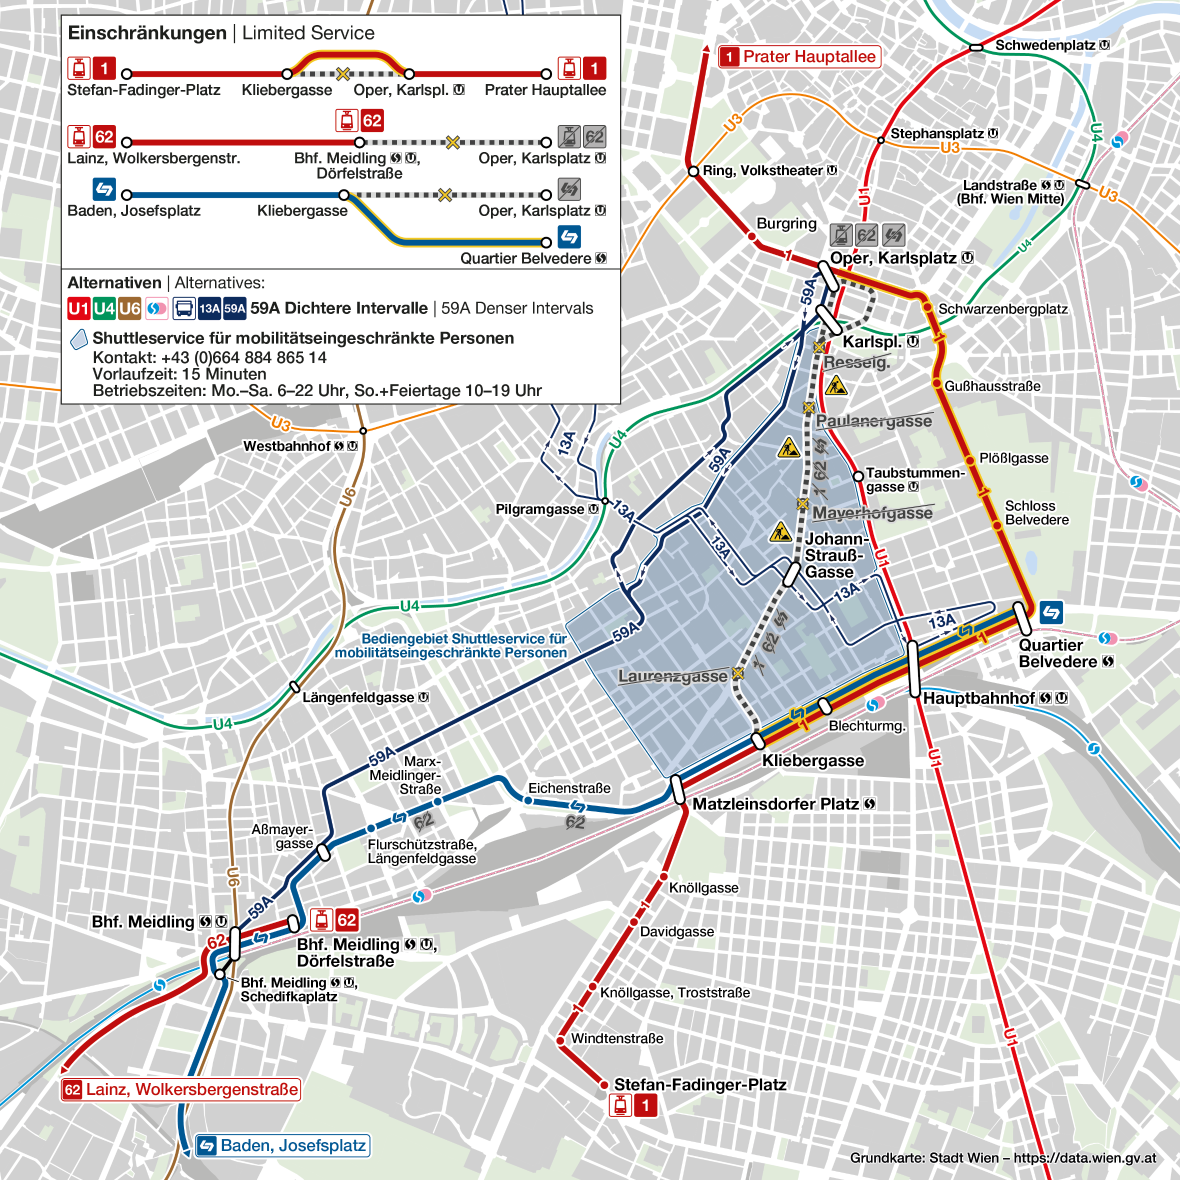 the diagram shows the public transport restrictions during the remodelling of Wiedner Hauptstraße and the area served by the free transport service for people with reduced mobility